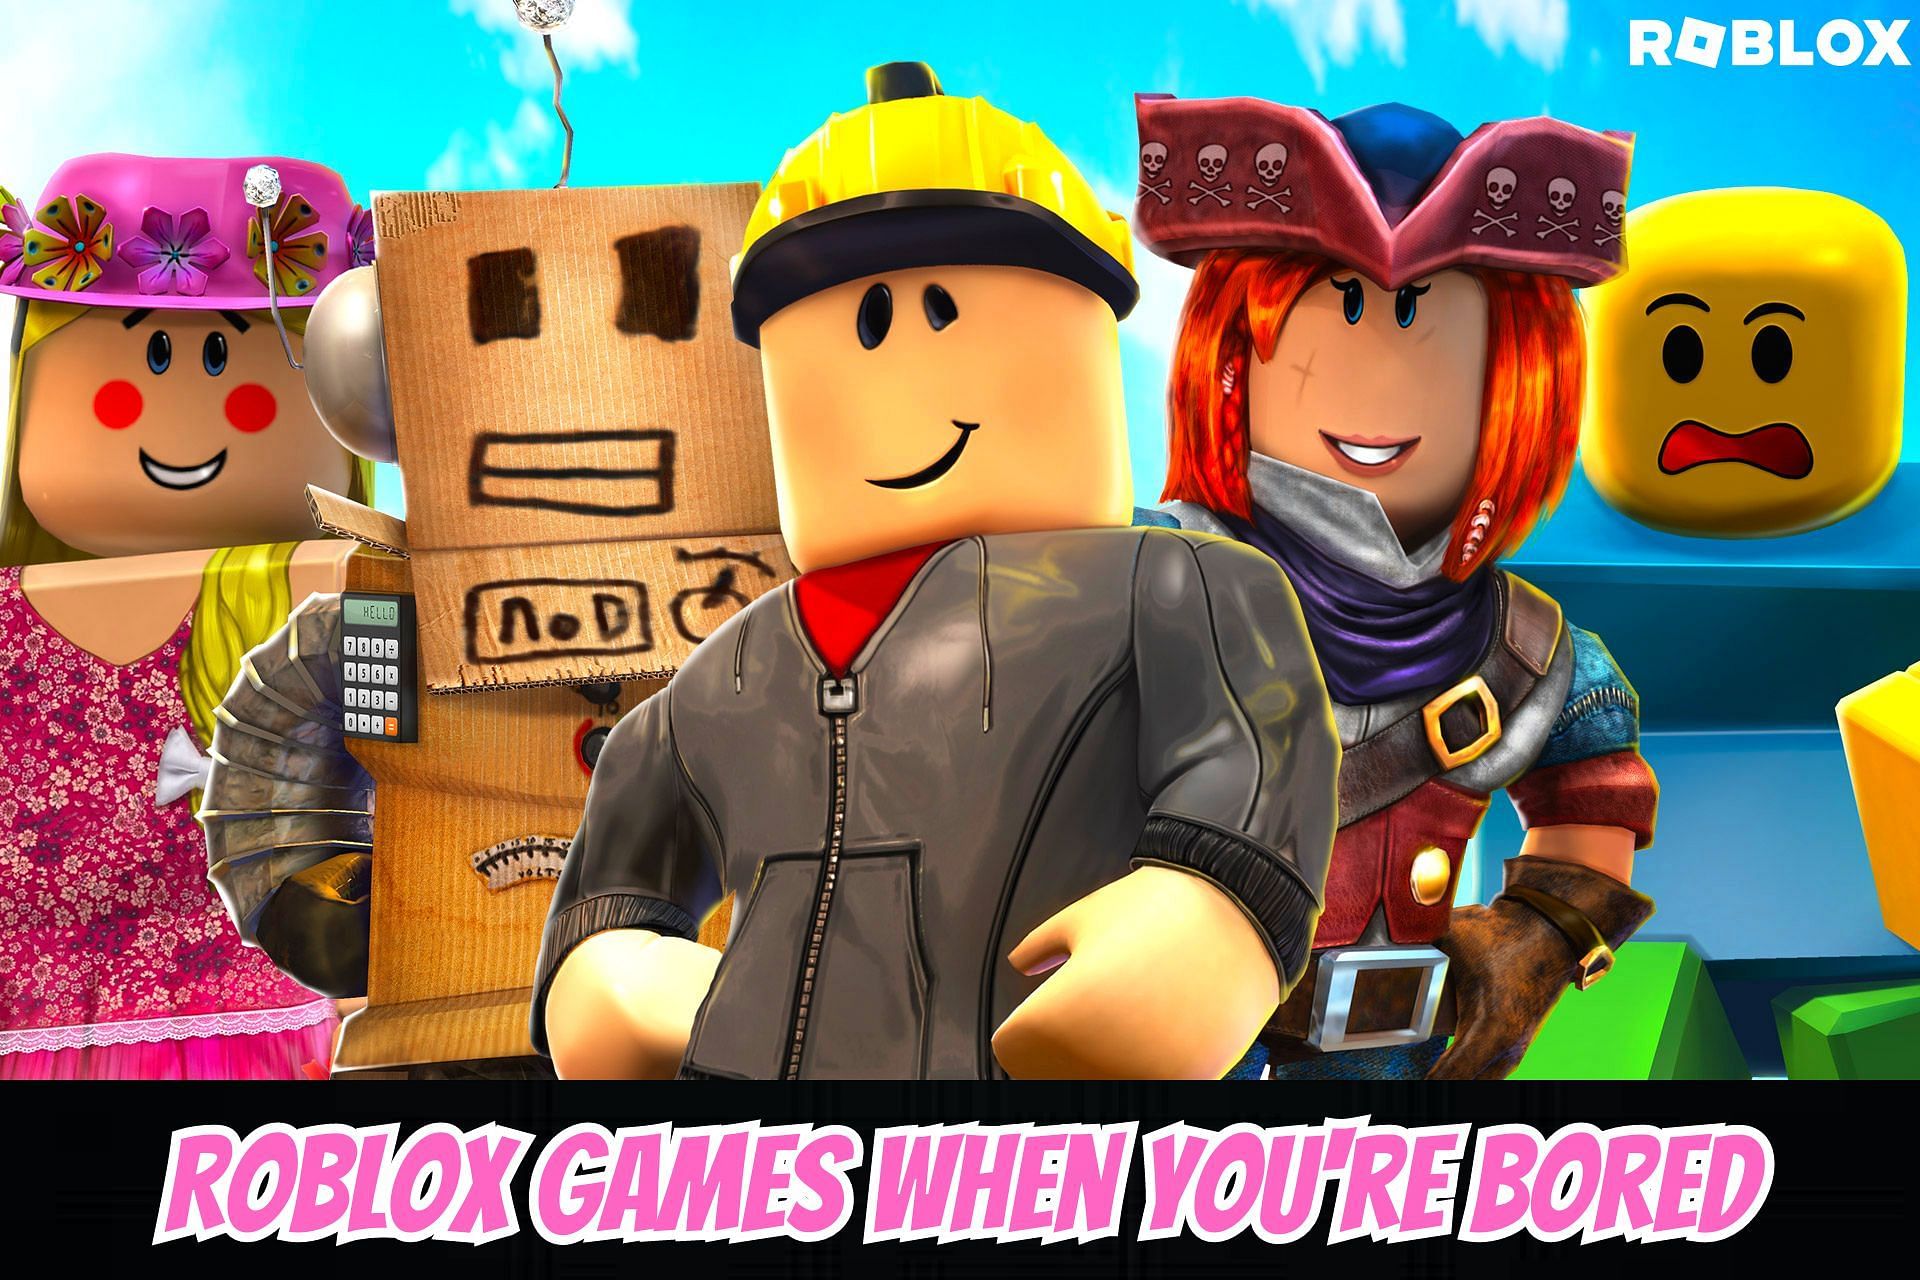 15 ☘️Roblox games to play when bored☘️ ideas